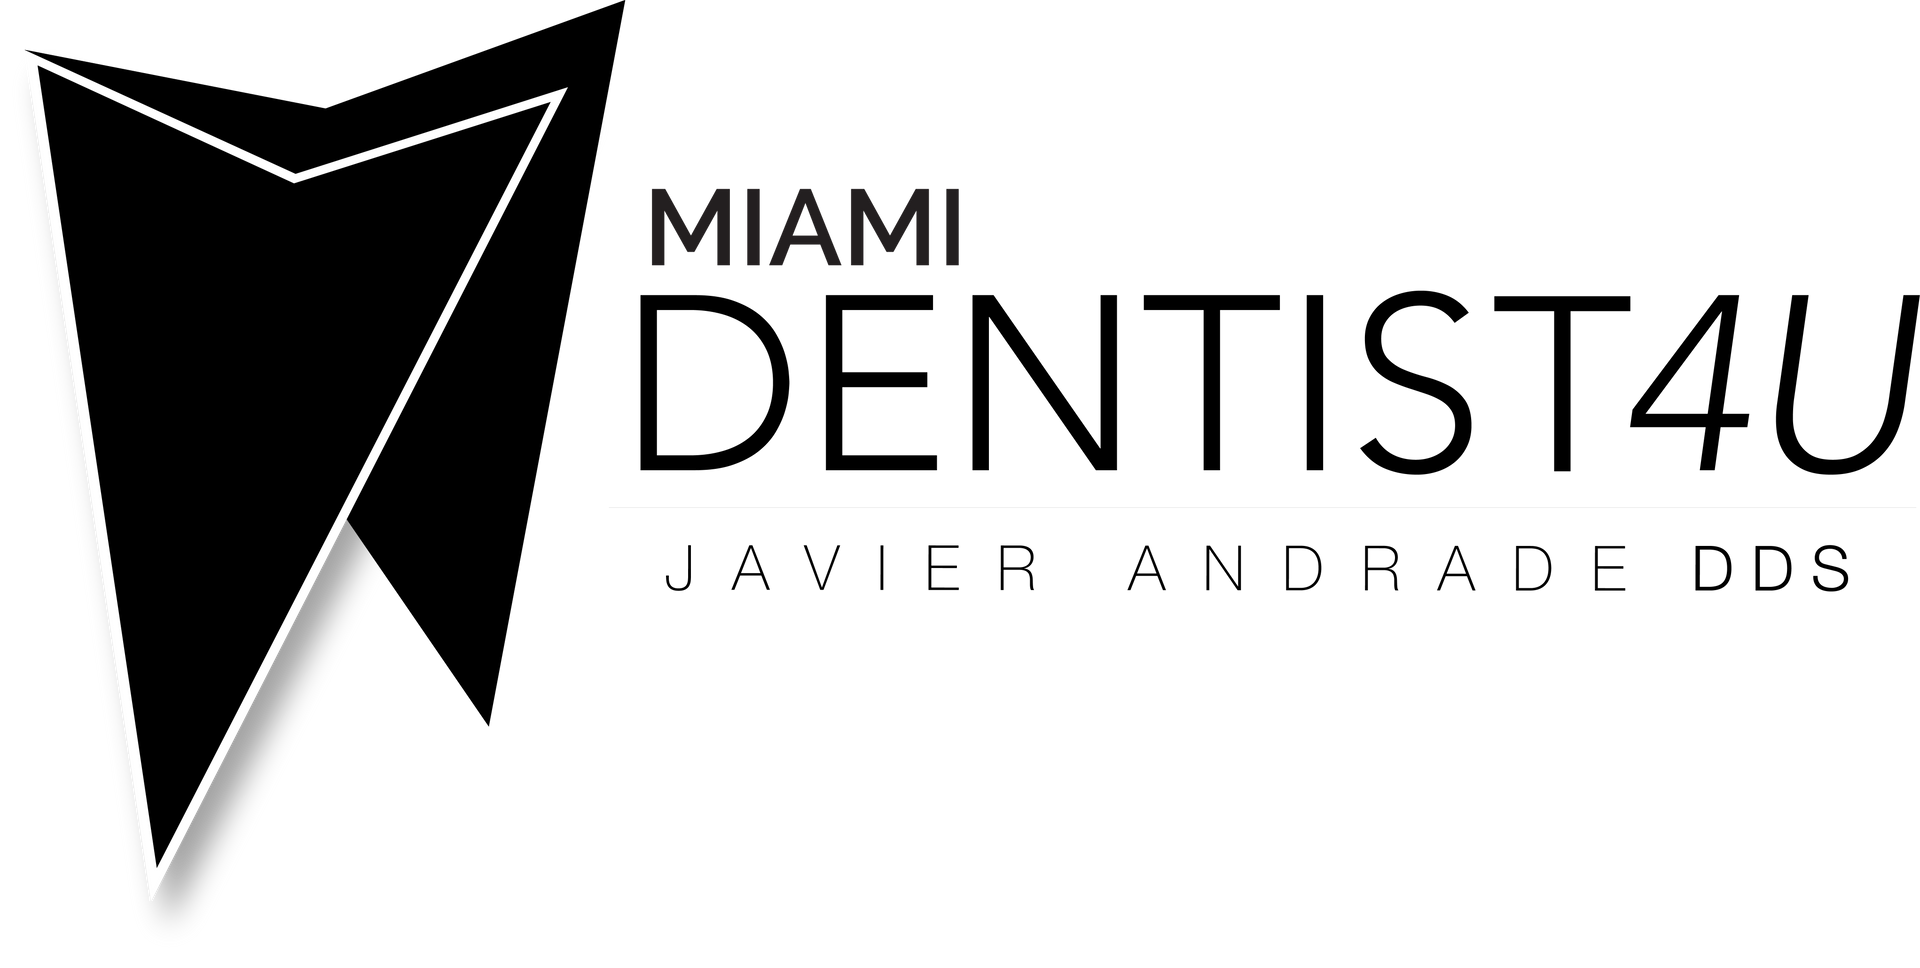 The logo for miami dentist4u javier andrade dds